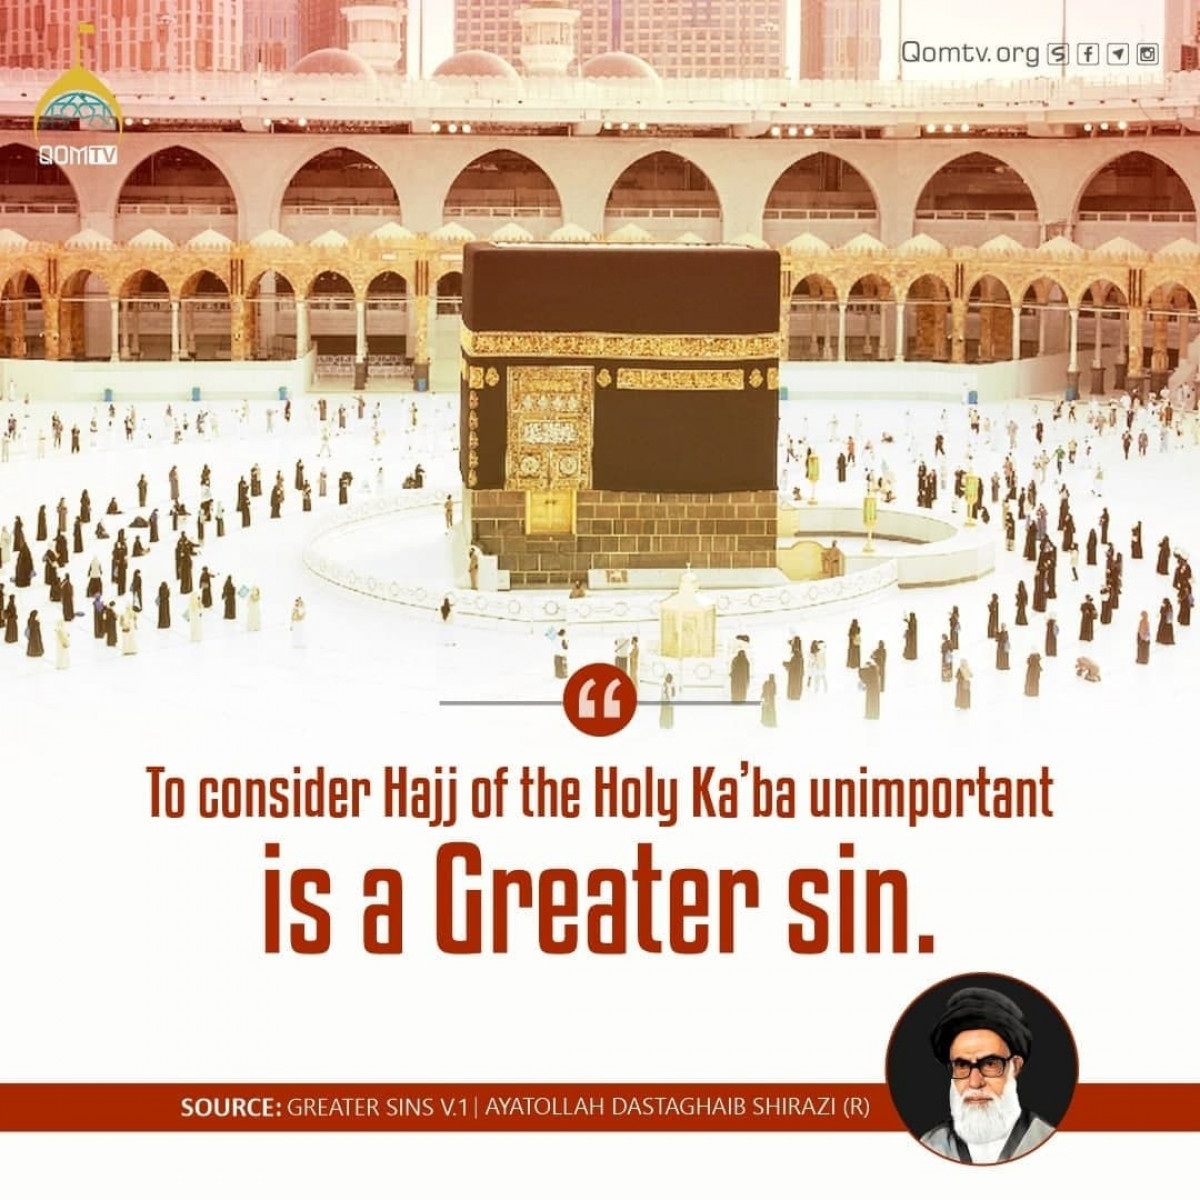 "To consider Hajj of the Holy Ka'ba unimportant is a Greater sin."